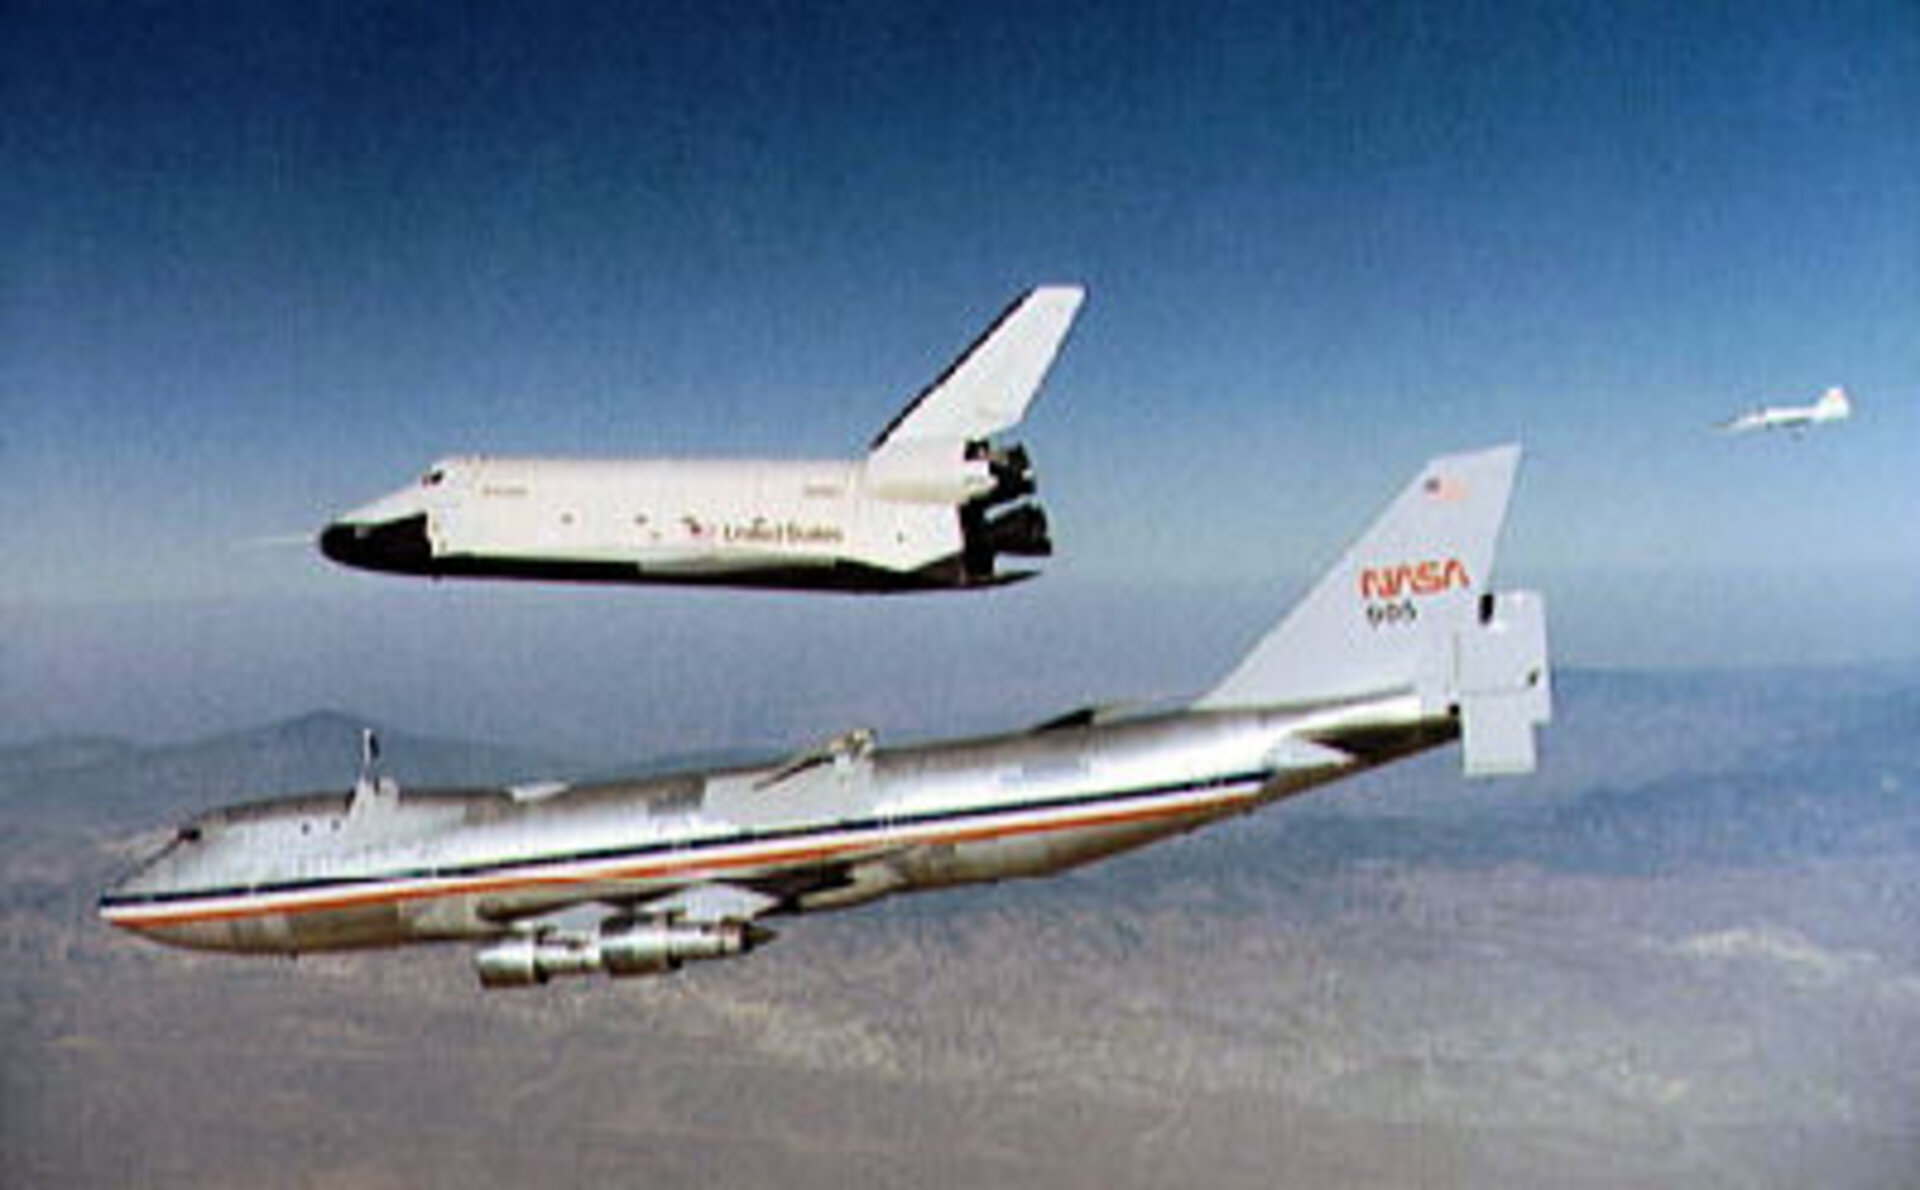 Enterprise separates from the NASA 747 carrier